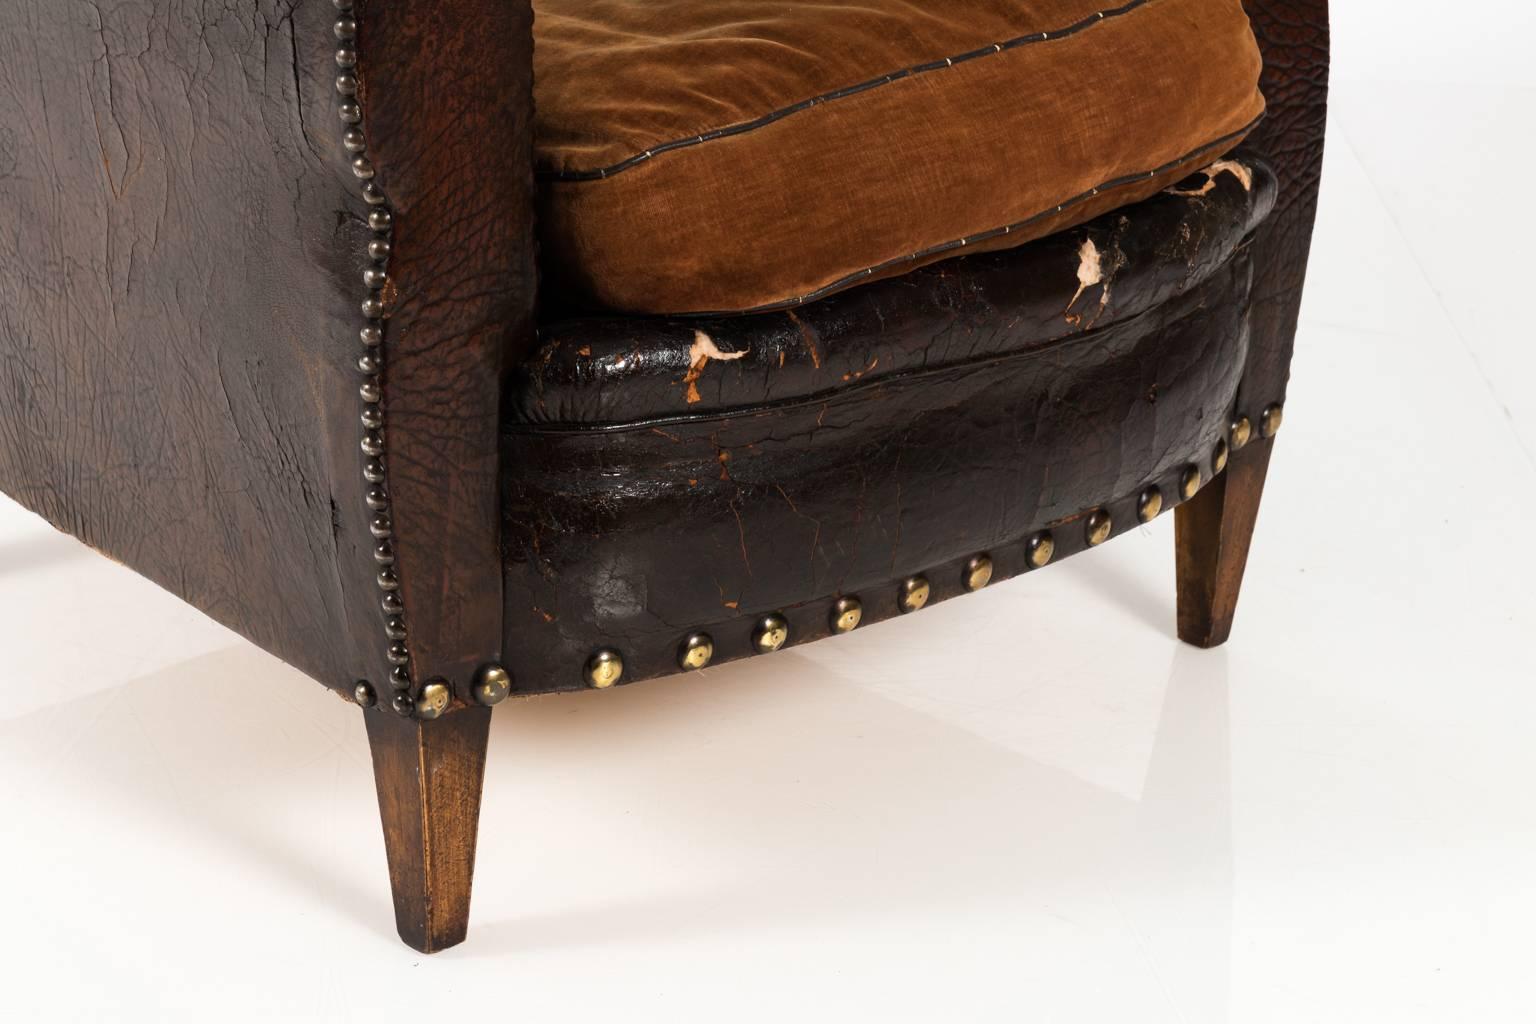 English leather club chair with velvet cushion and oversized nailhead trim, circa 1890.
 